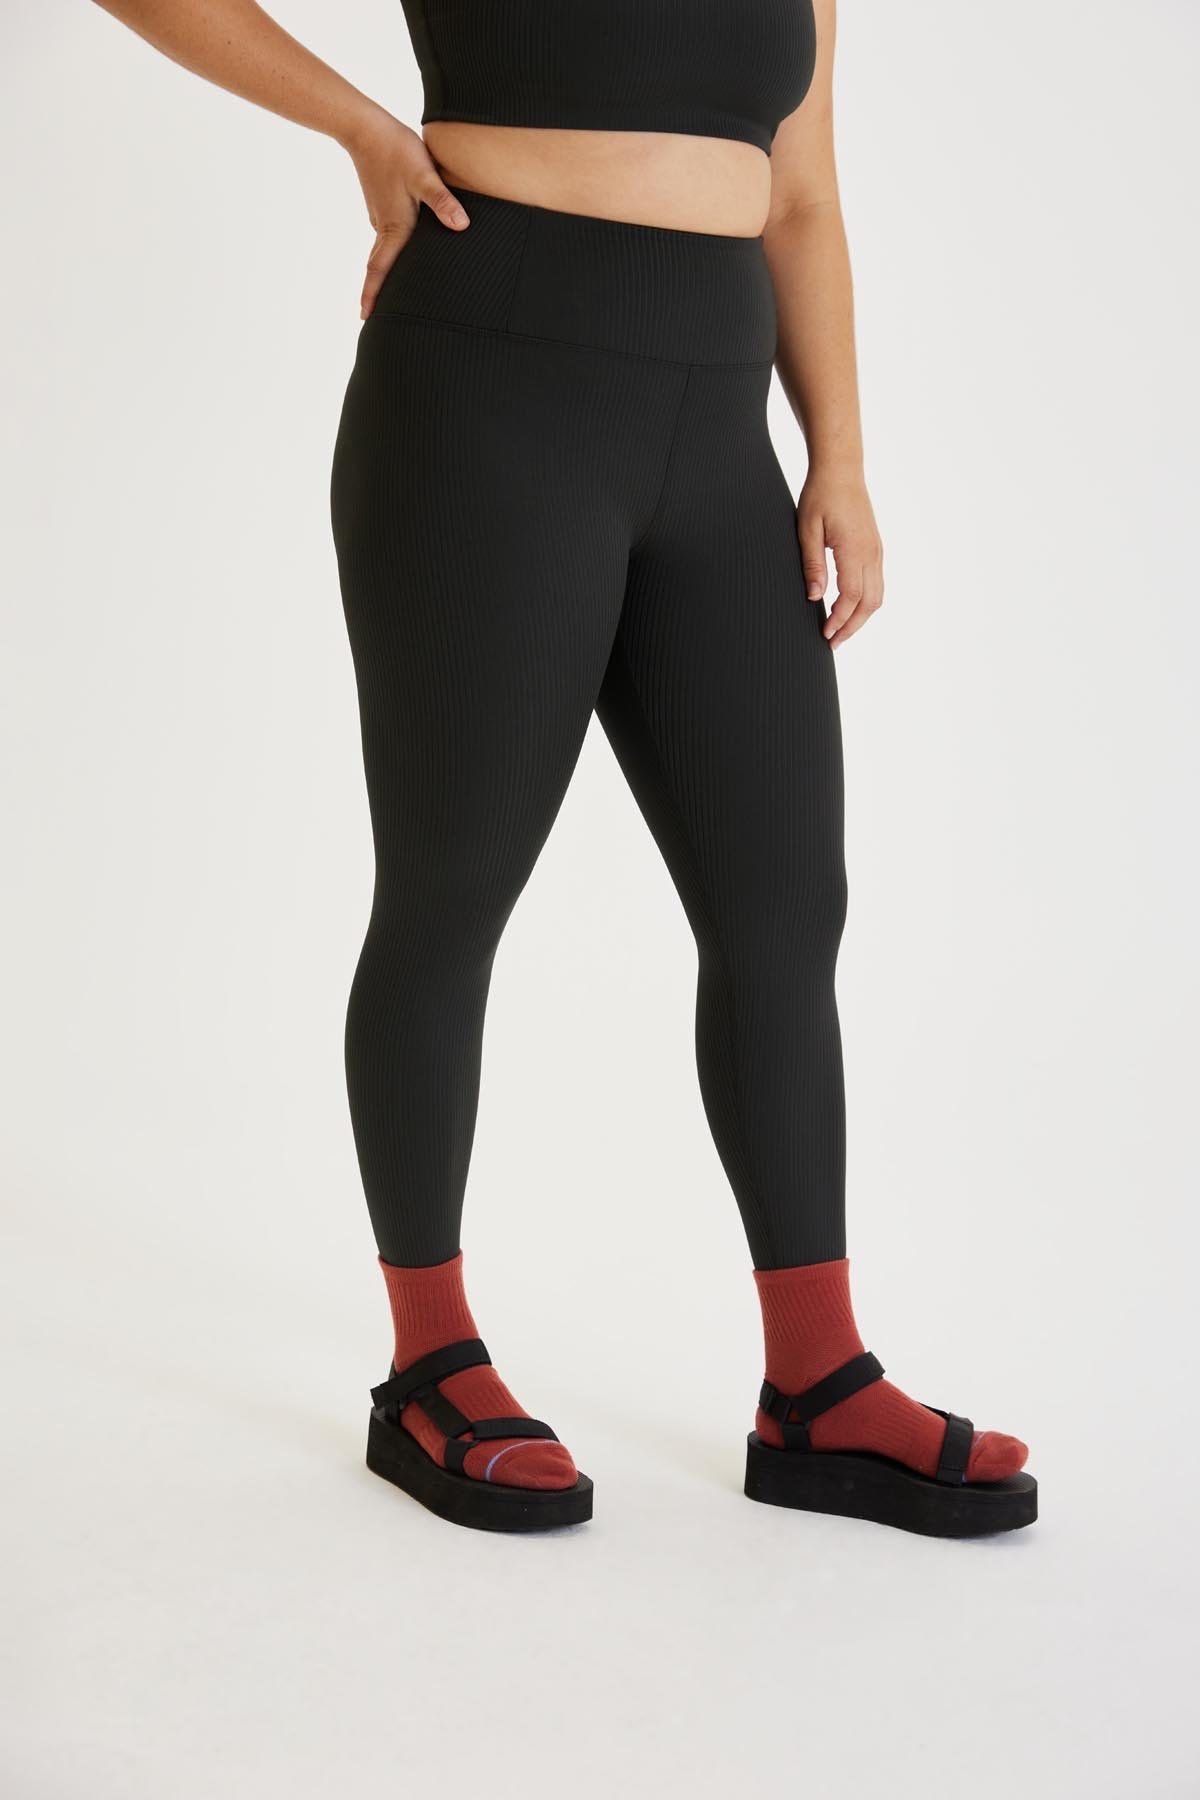 Are Girlfriend Collective Leggings Squat Proof? – solowomen